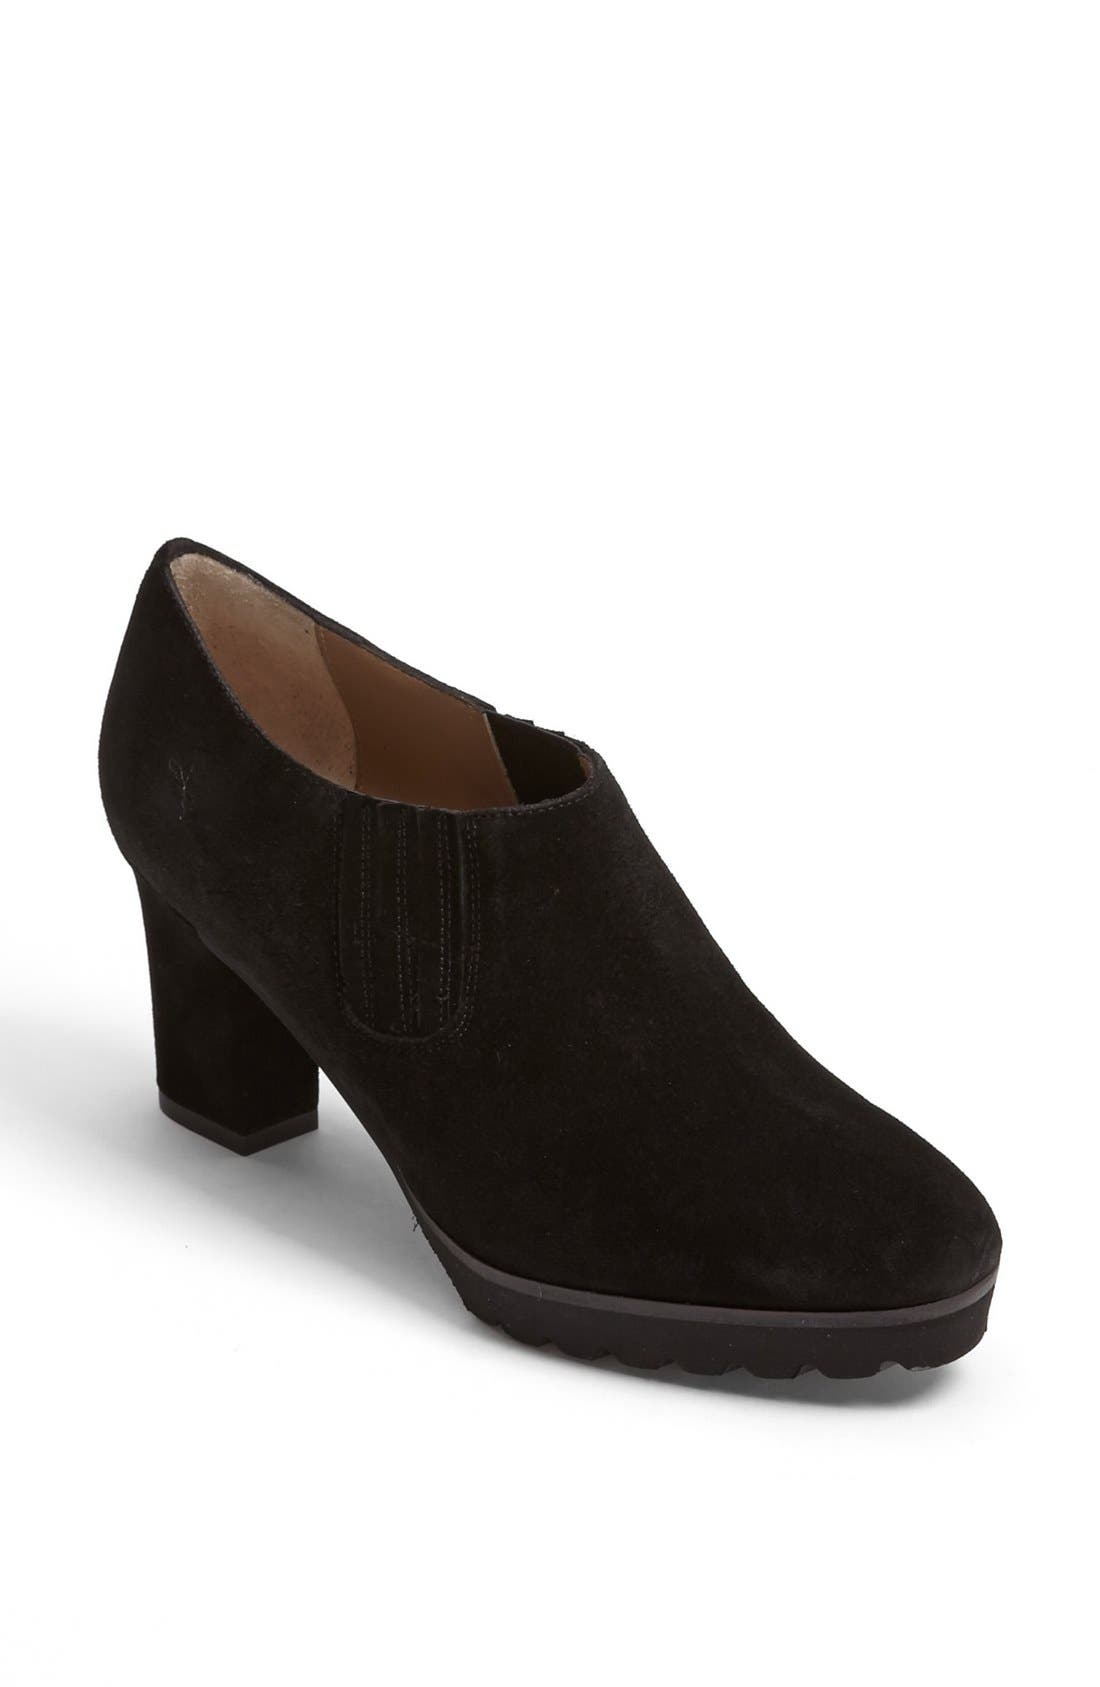 anyi lu shoes nordstrom